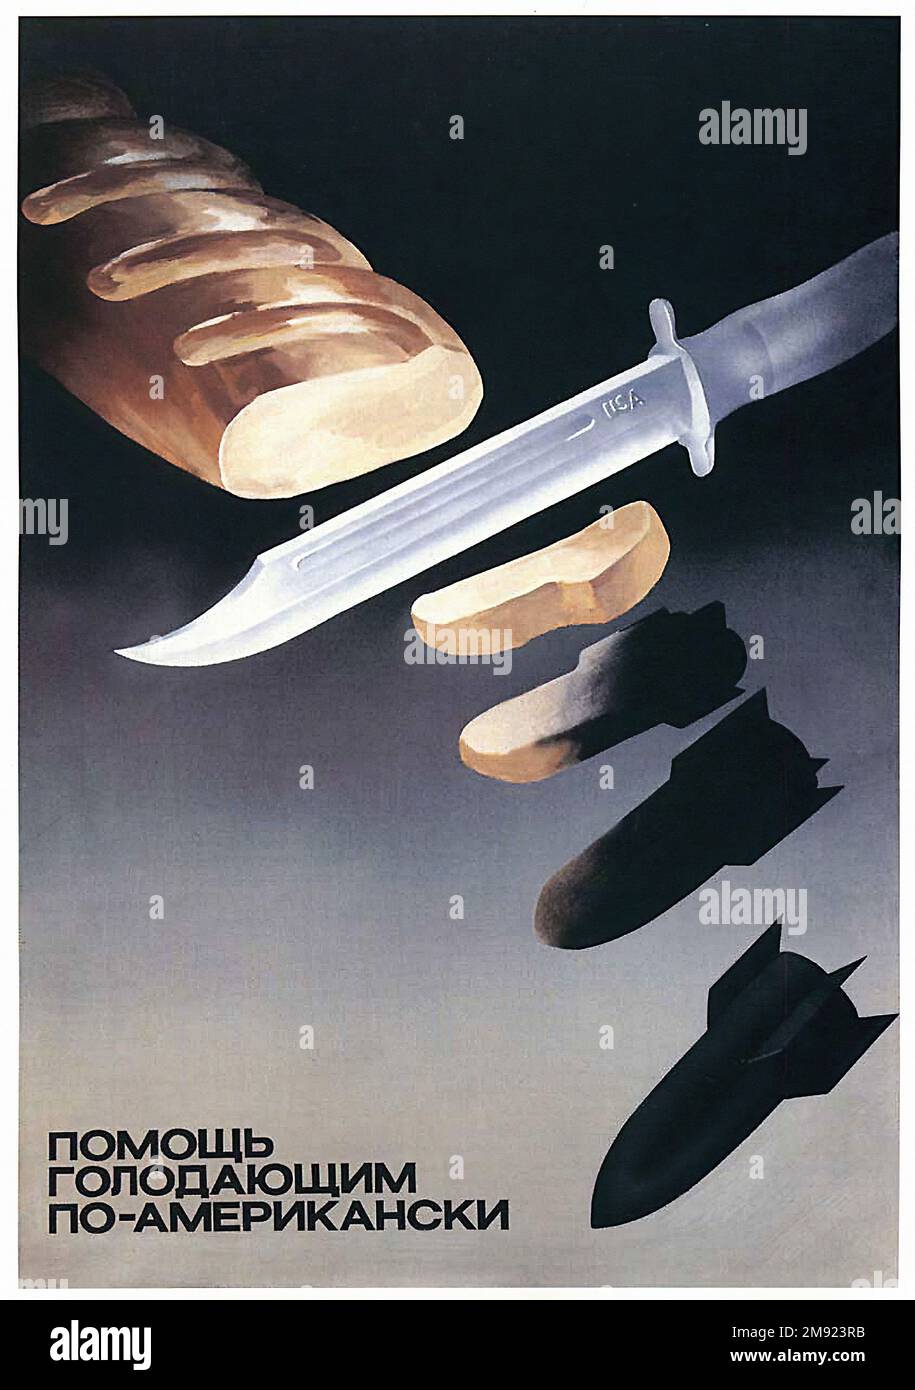 Bread To Bombs! (Translated from Russian) - Vintage USSR soviet propaganda poster Stock Photo